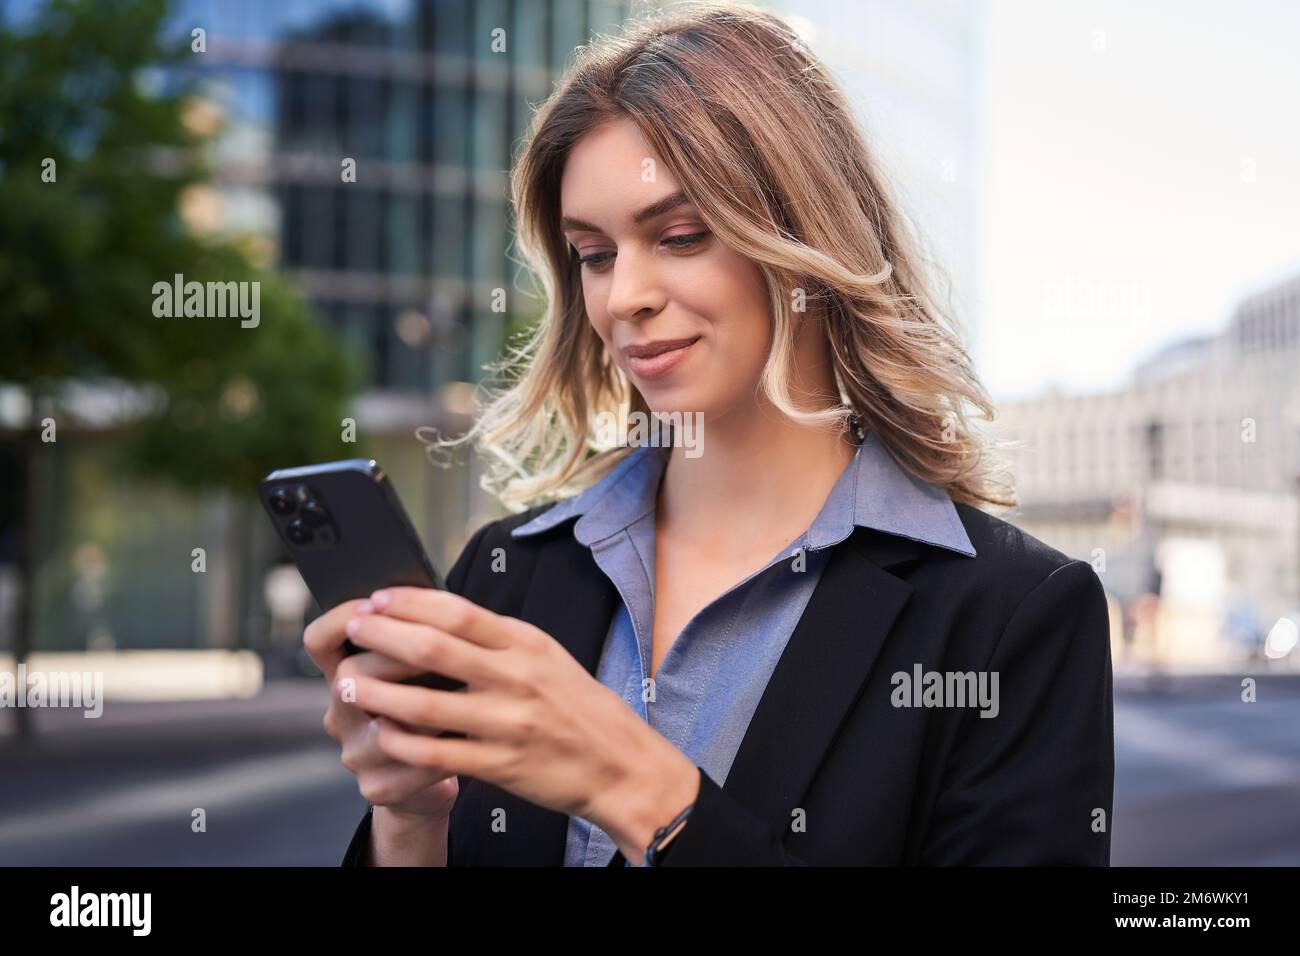 Close up portrait of young corporate woman in black suit, holds smartphone, texting message while standing on street, using mobi Stock Photo